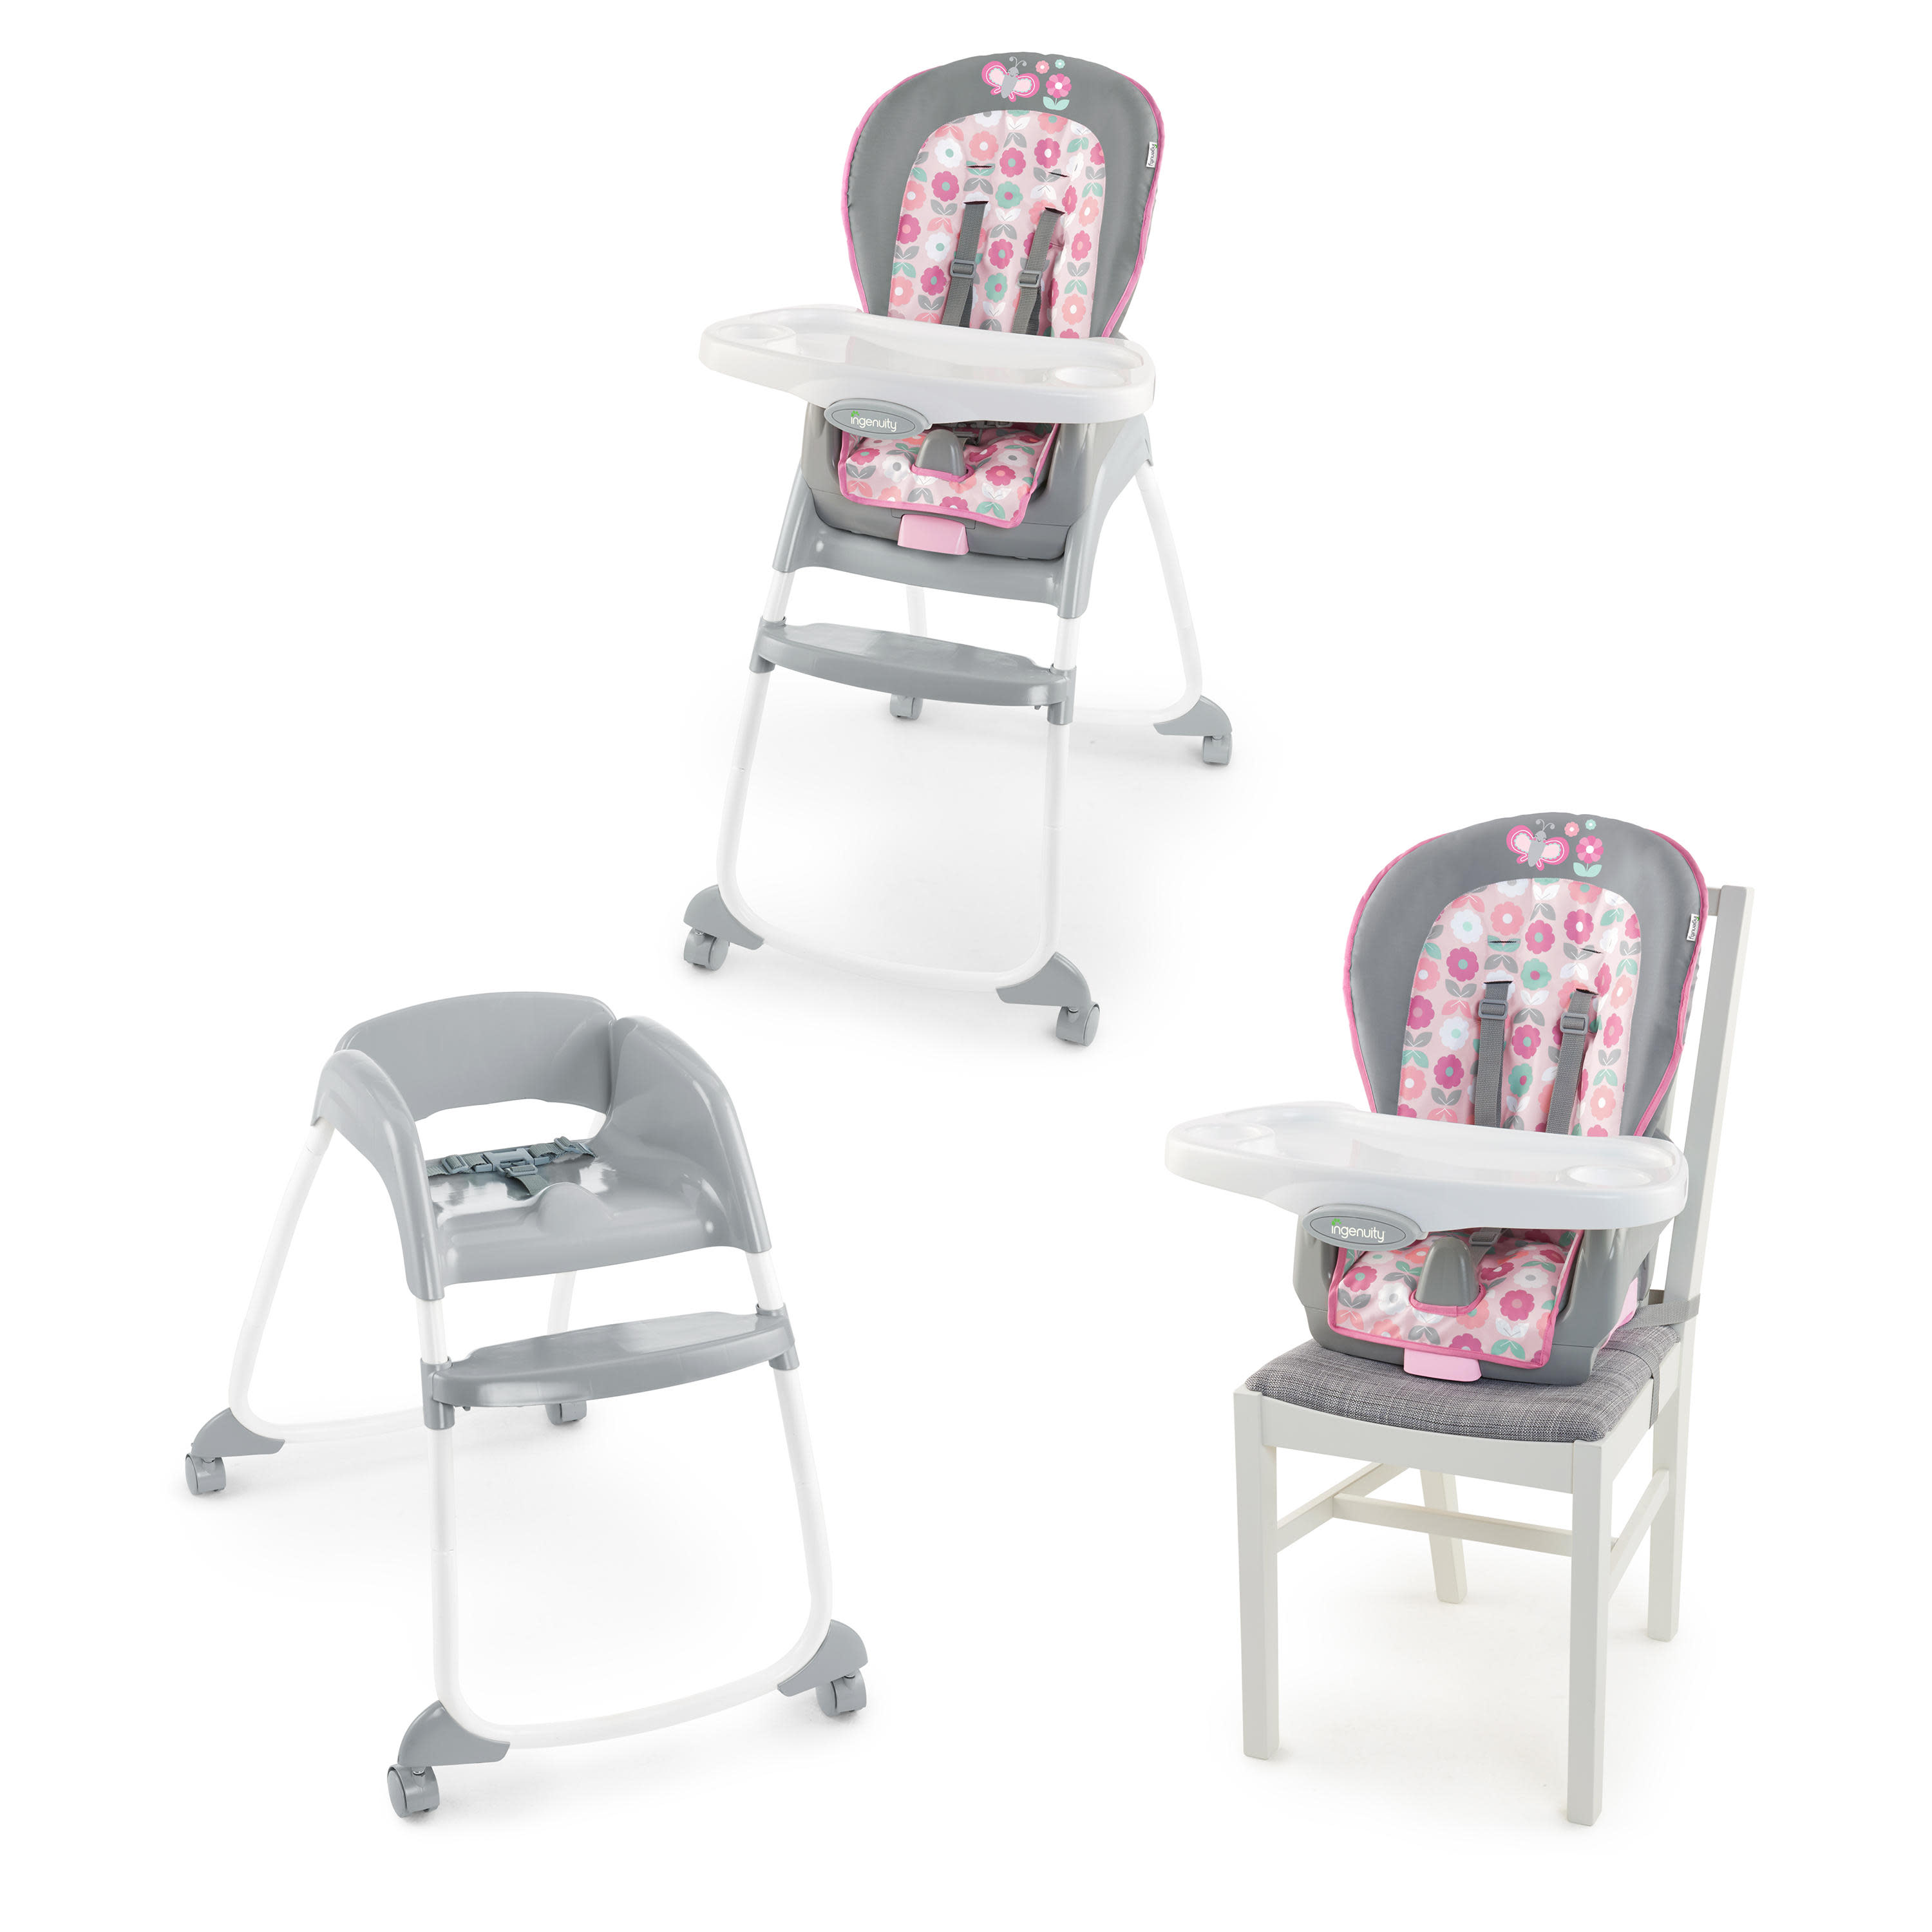 Ingenuity Trio 3-in-1 High Chair - Phoebe - image 1 of 13